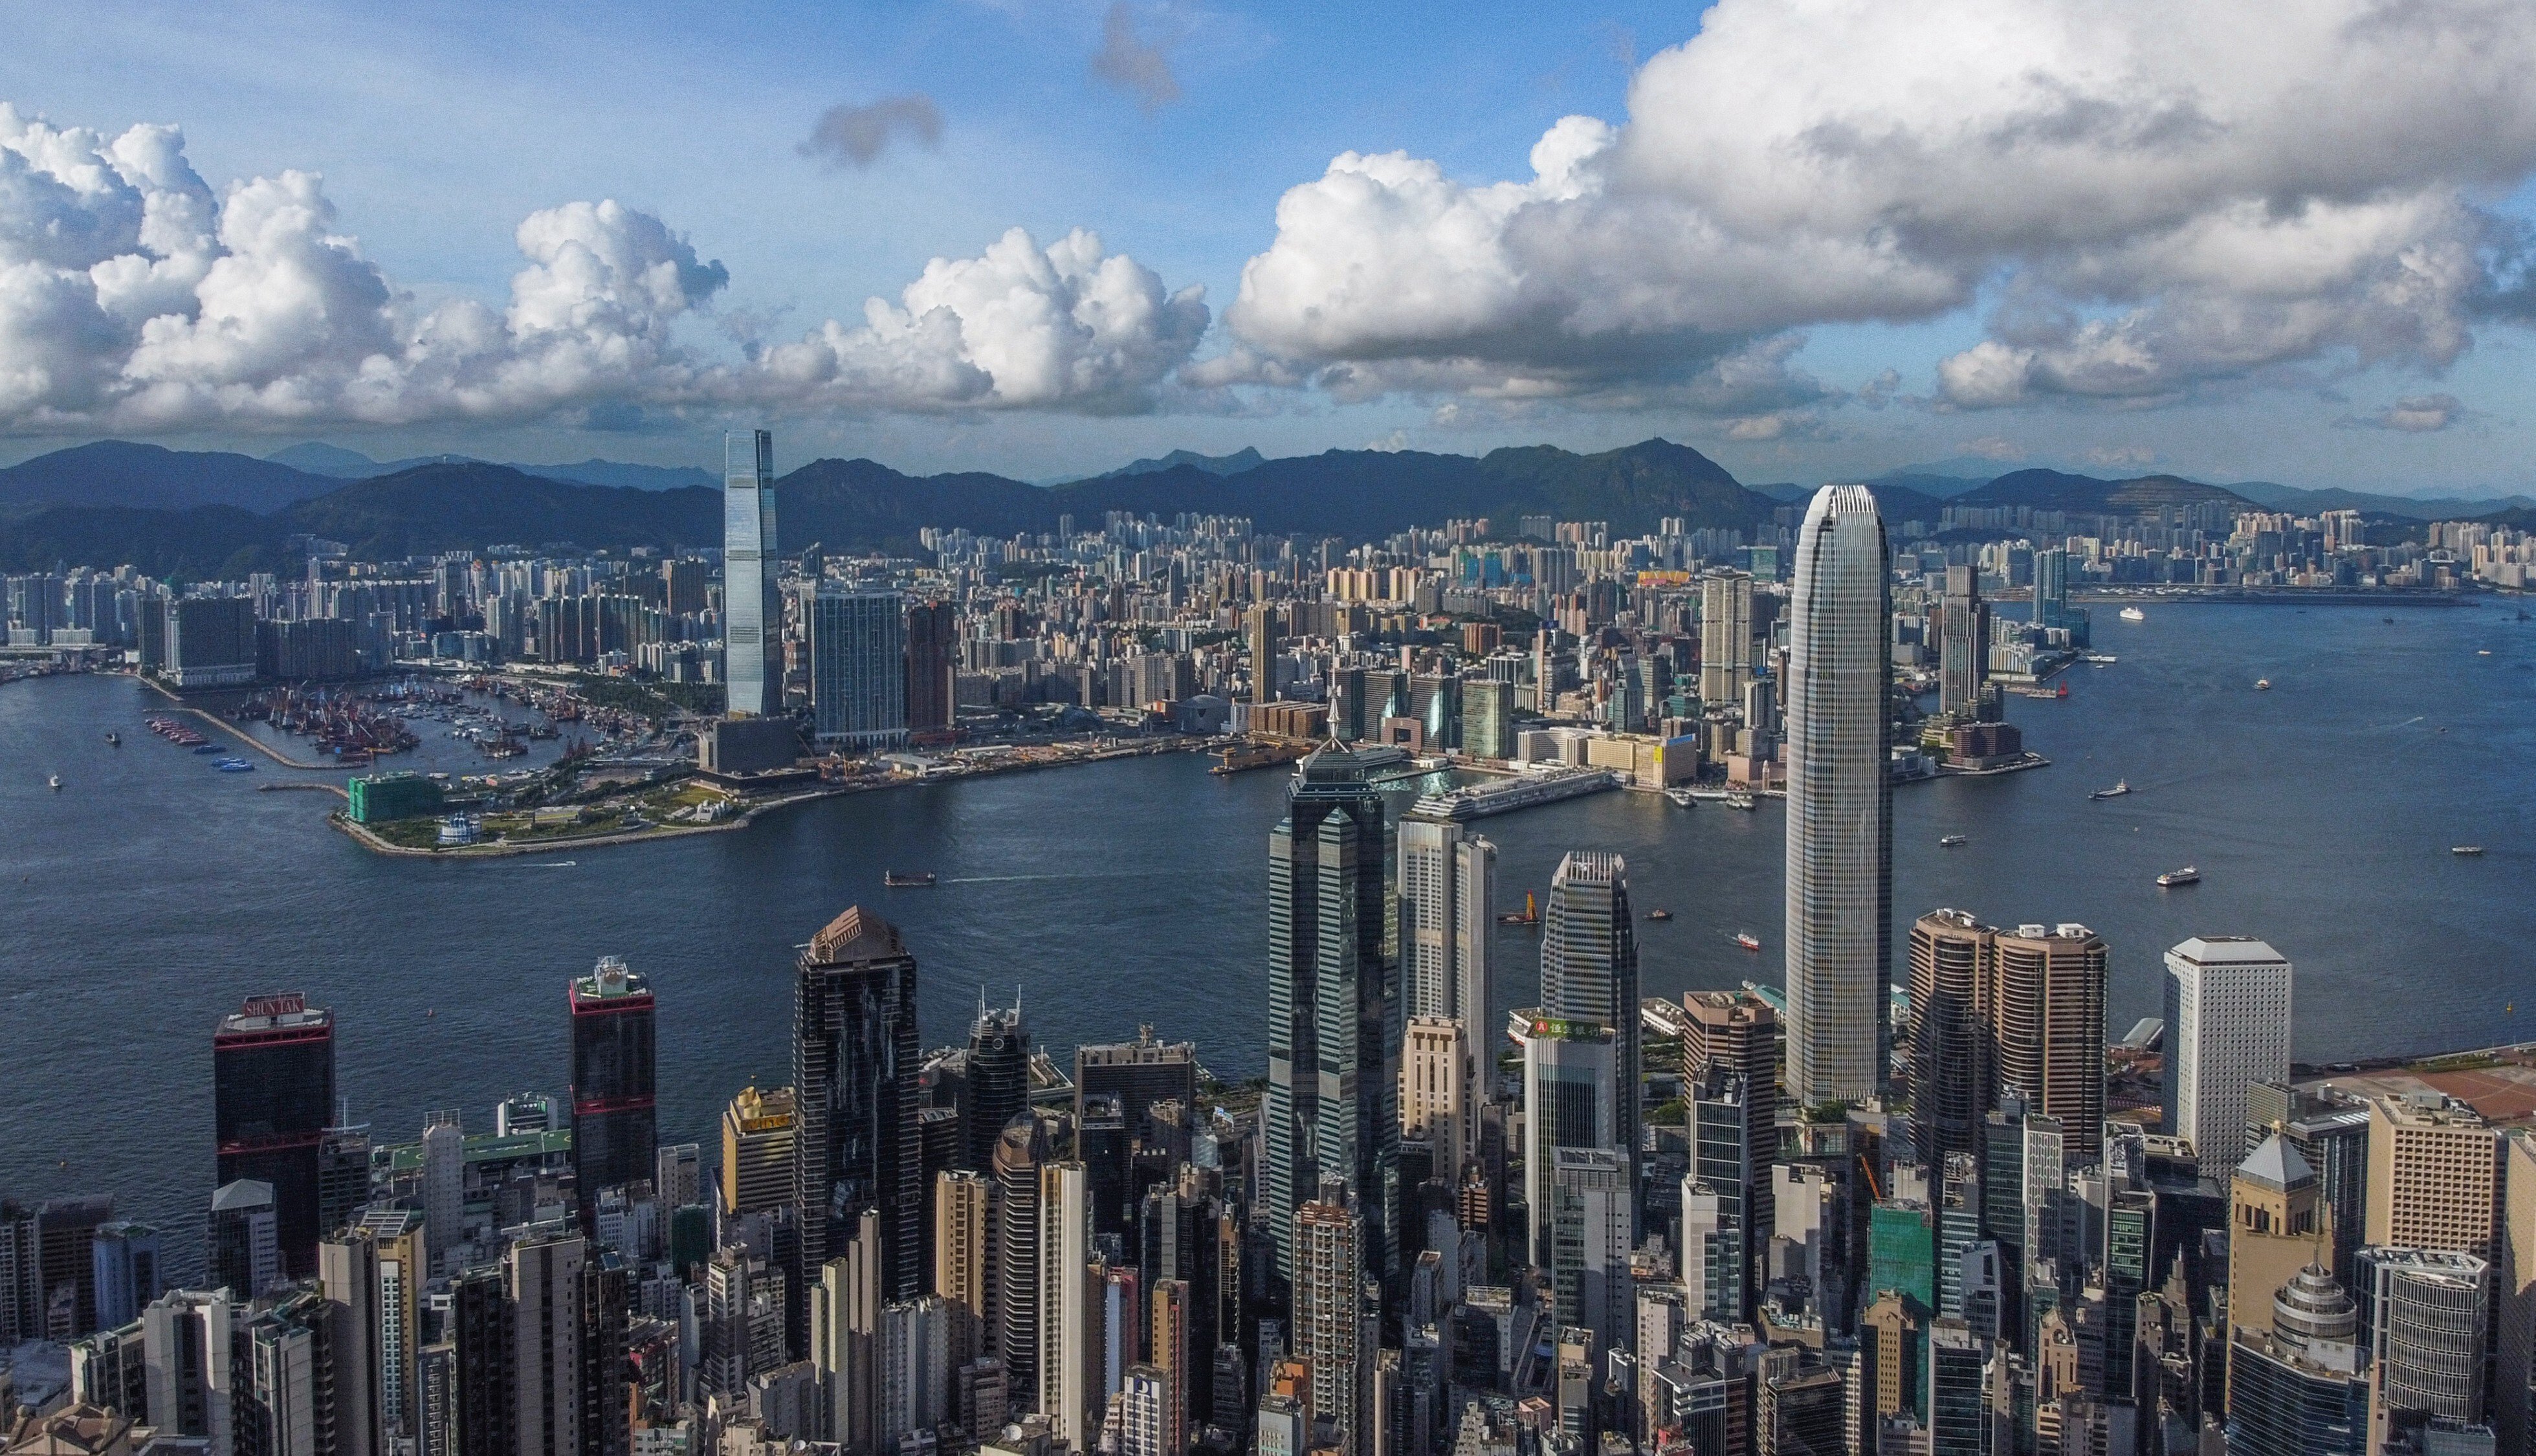 Hong Kong is facing a huge deficit from government spending to keep residents and businesses afloat amid the Covid-19 pandemic and recession. Photo: Sun Yeung